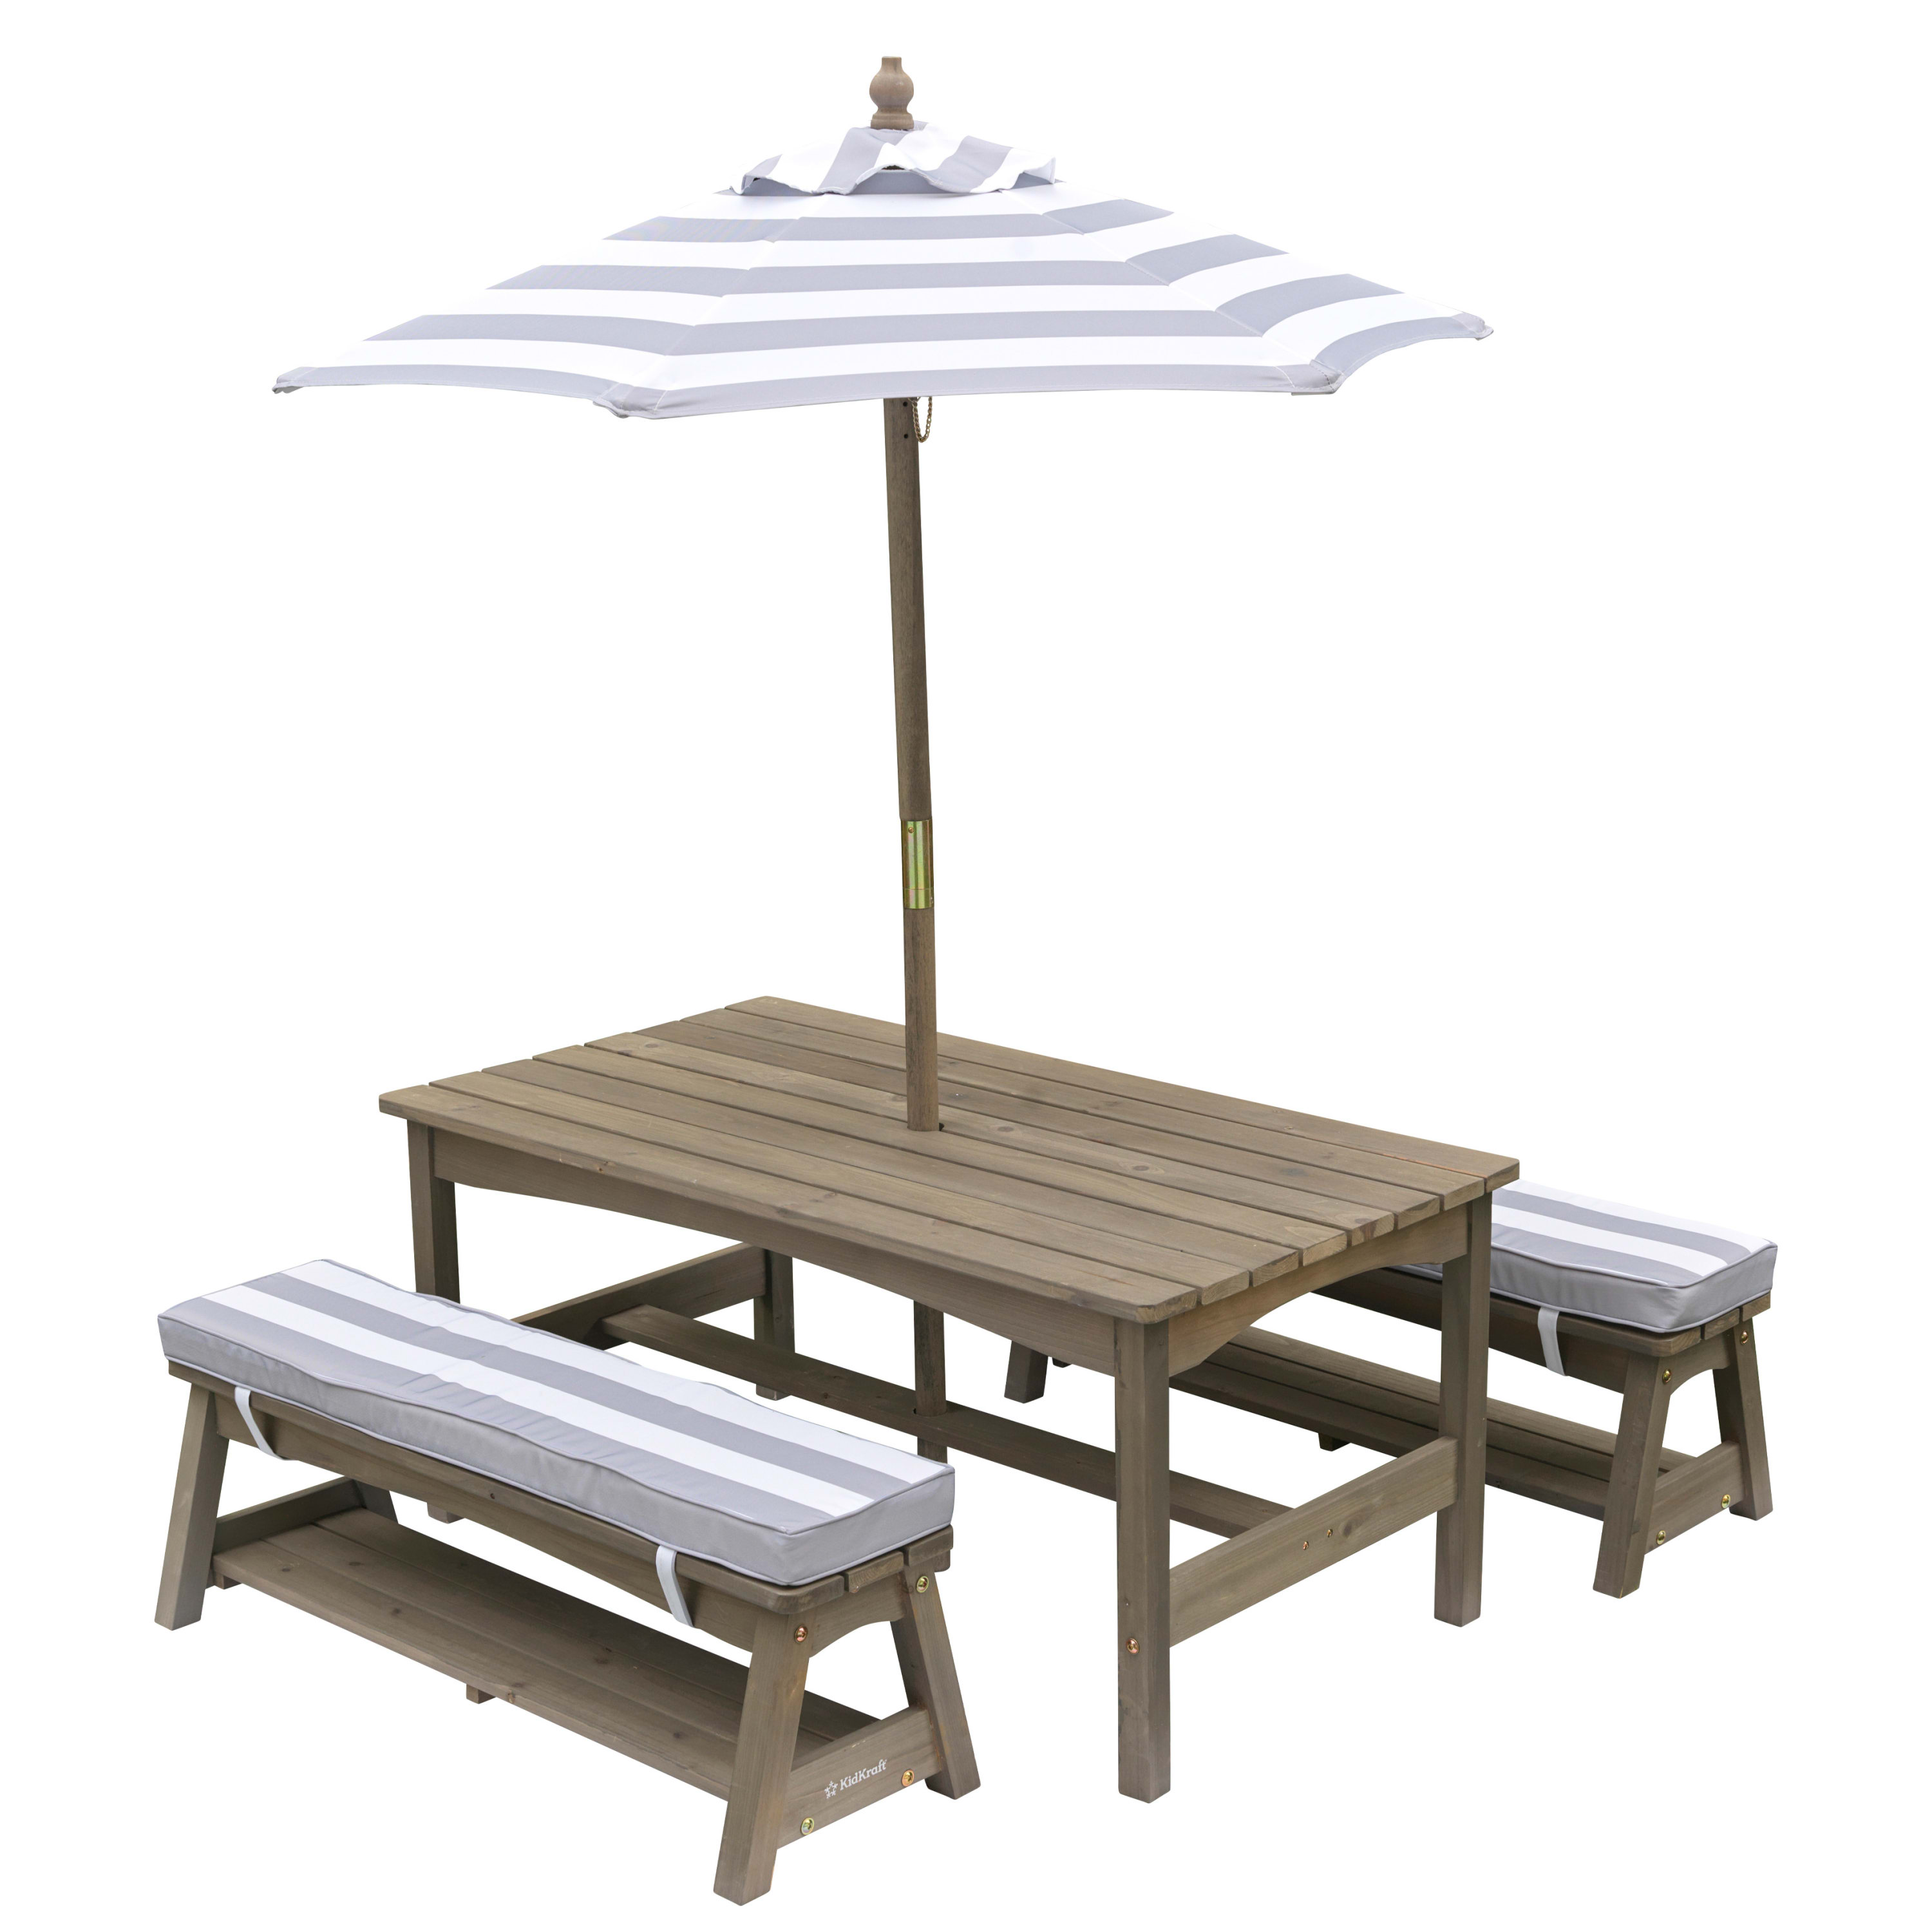 KidKraft Outdoor Table & Bench Set with Cushions and Umbrella, Gray and White Stripes, For Ages 3+ - image 1 of 9